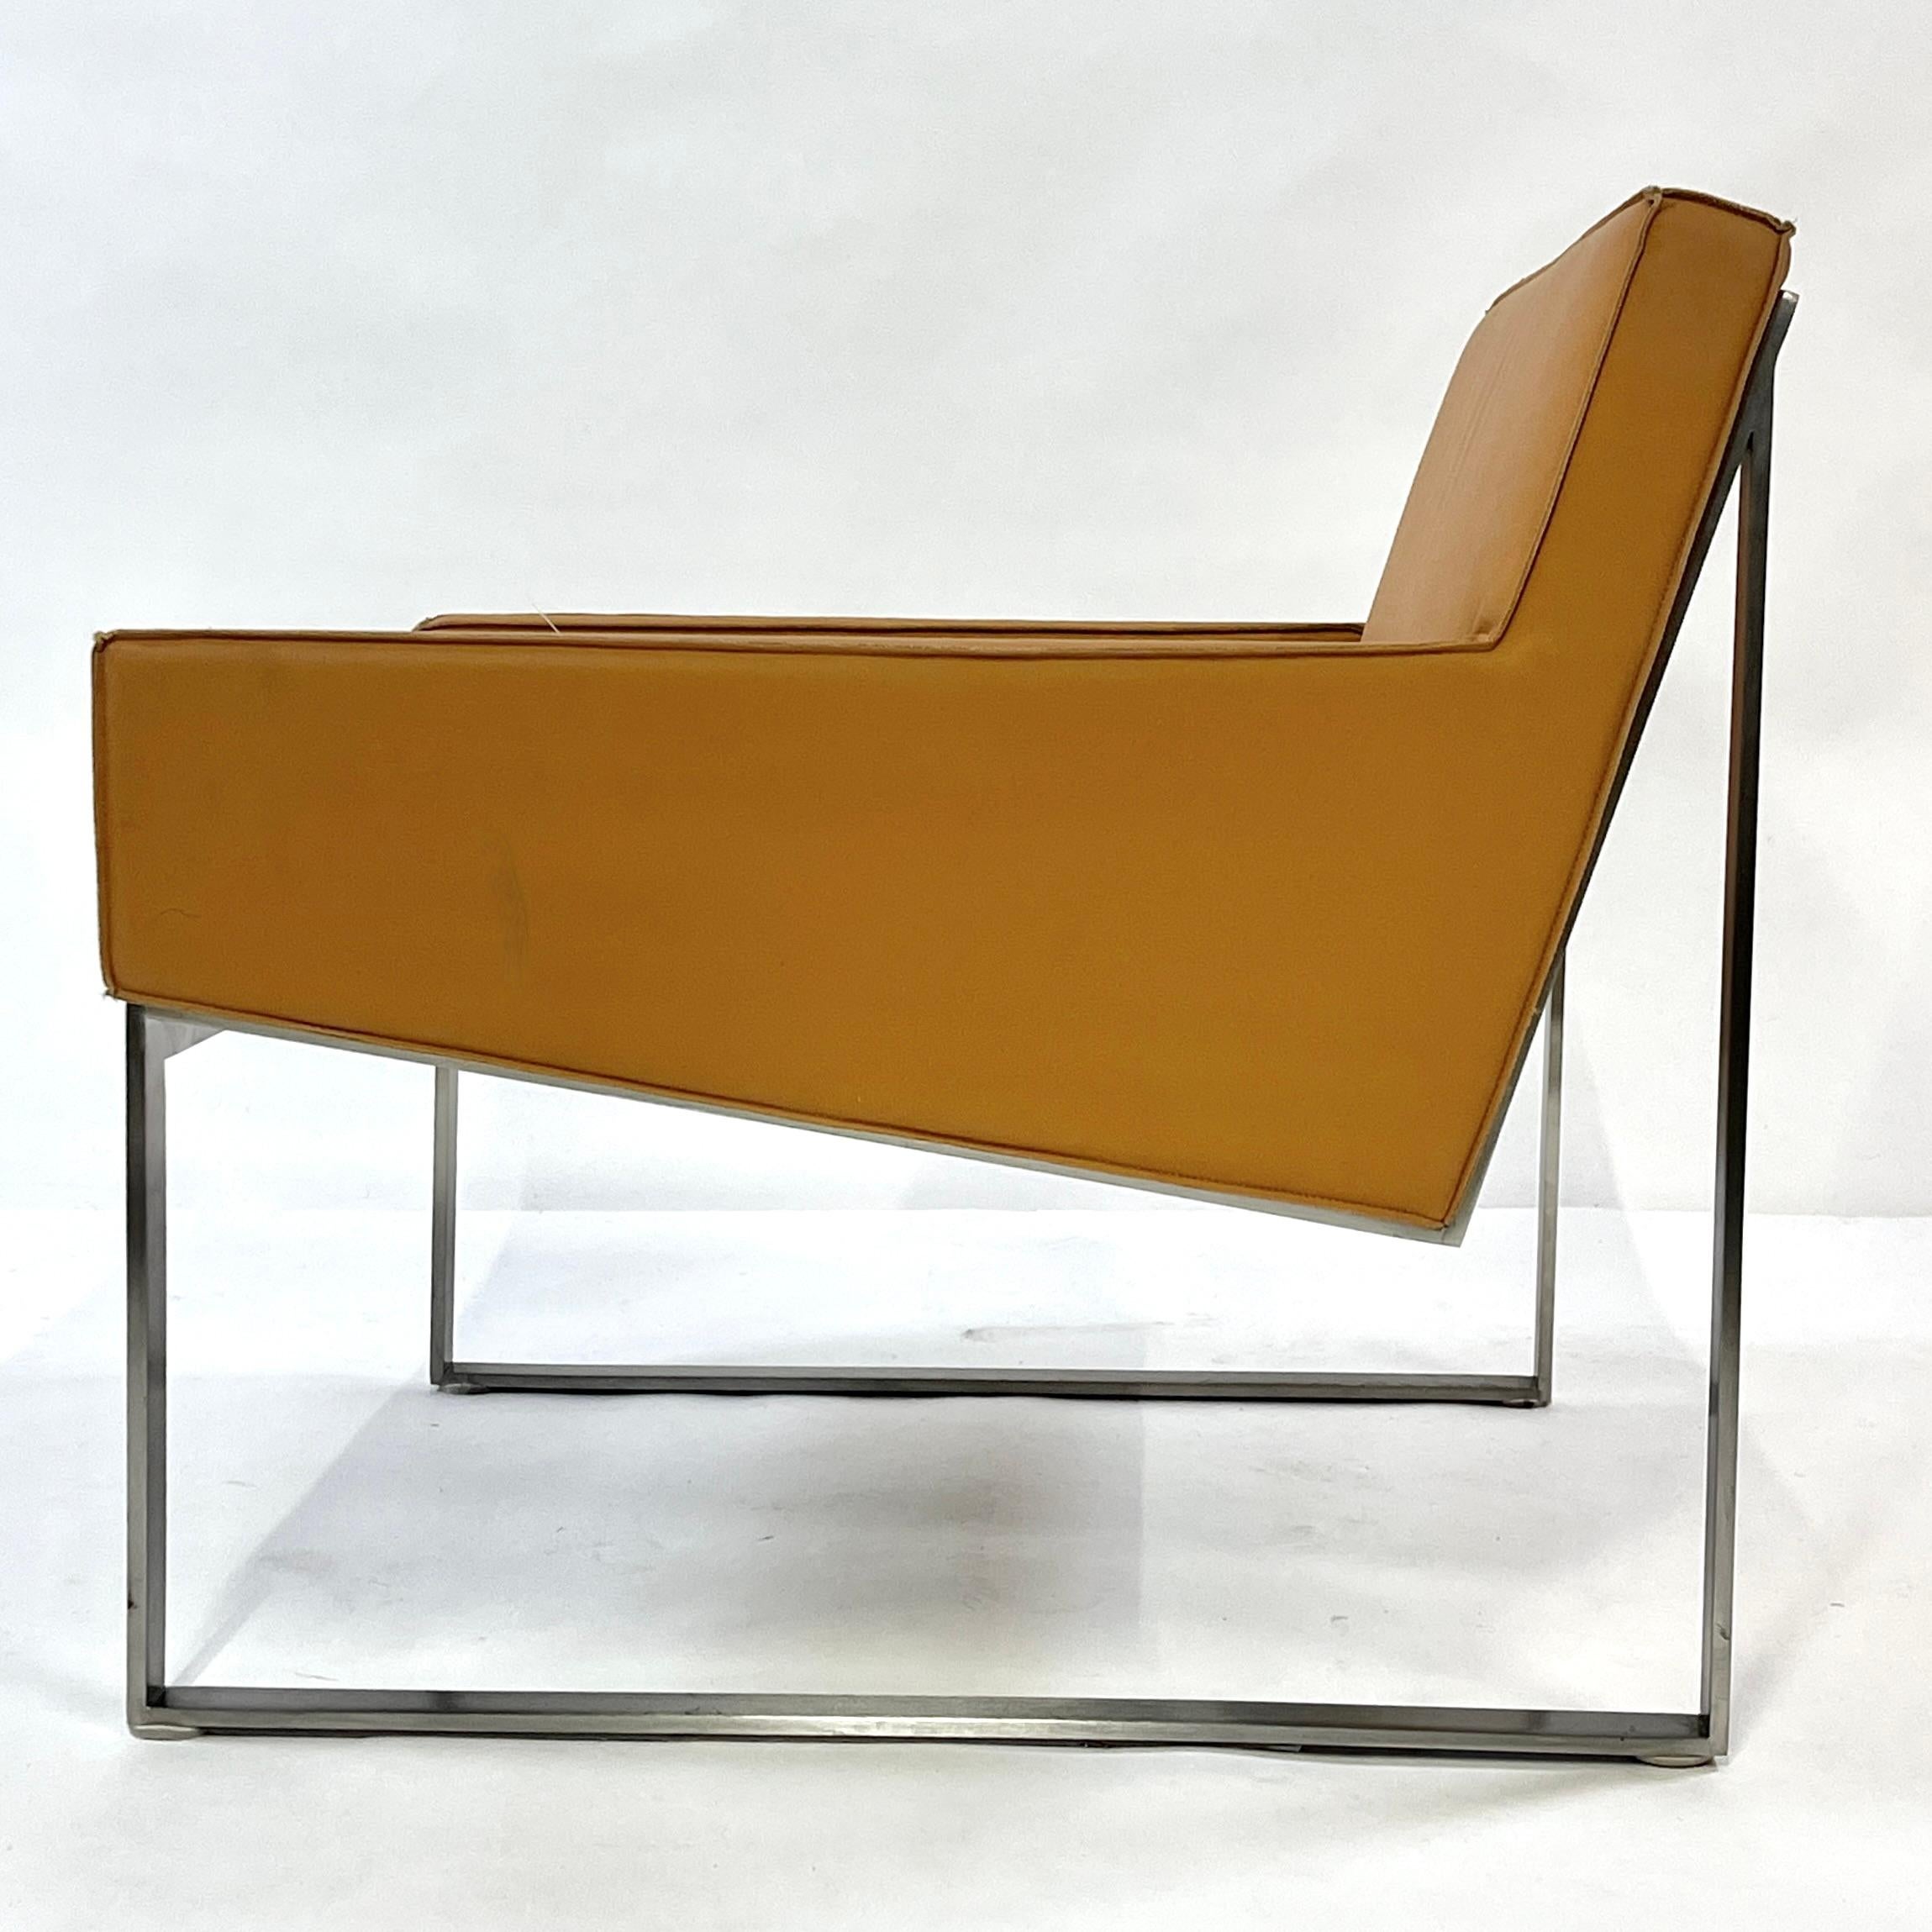 Contemporary Tan Leather & Brushed Nickel Lounge Chairs by Fabien Baron -Bernhardt 4 Avail